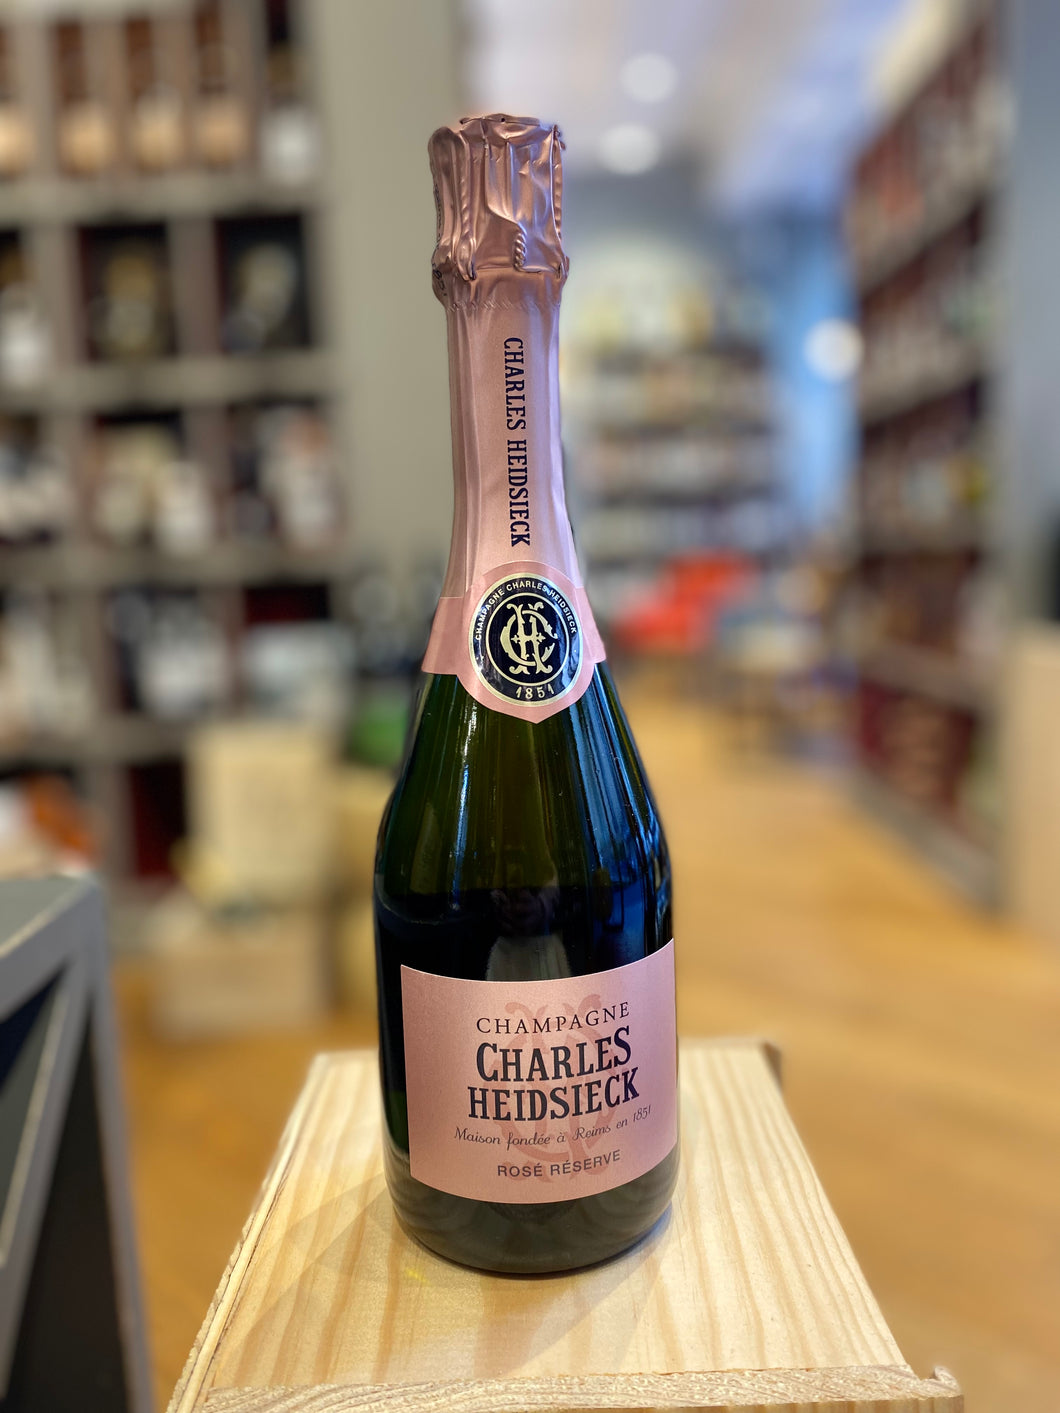 Champagne Charles Heidsieck Rose Reserve demi-bouteille, 37.5